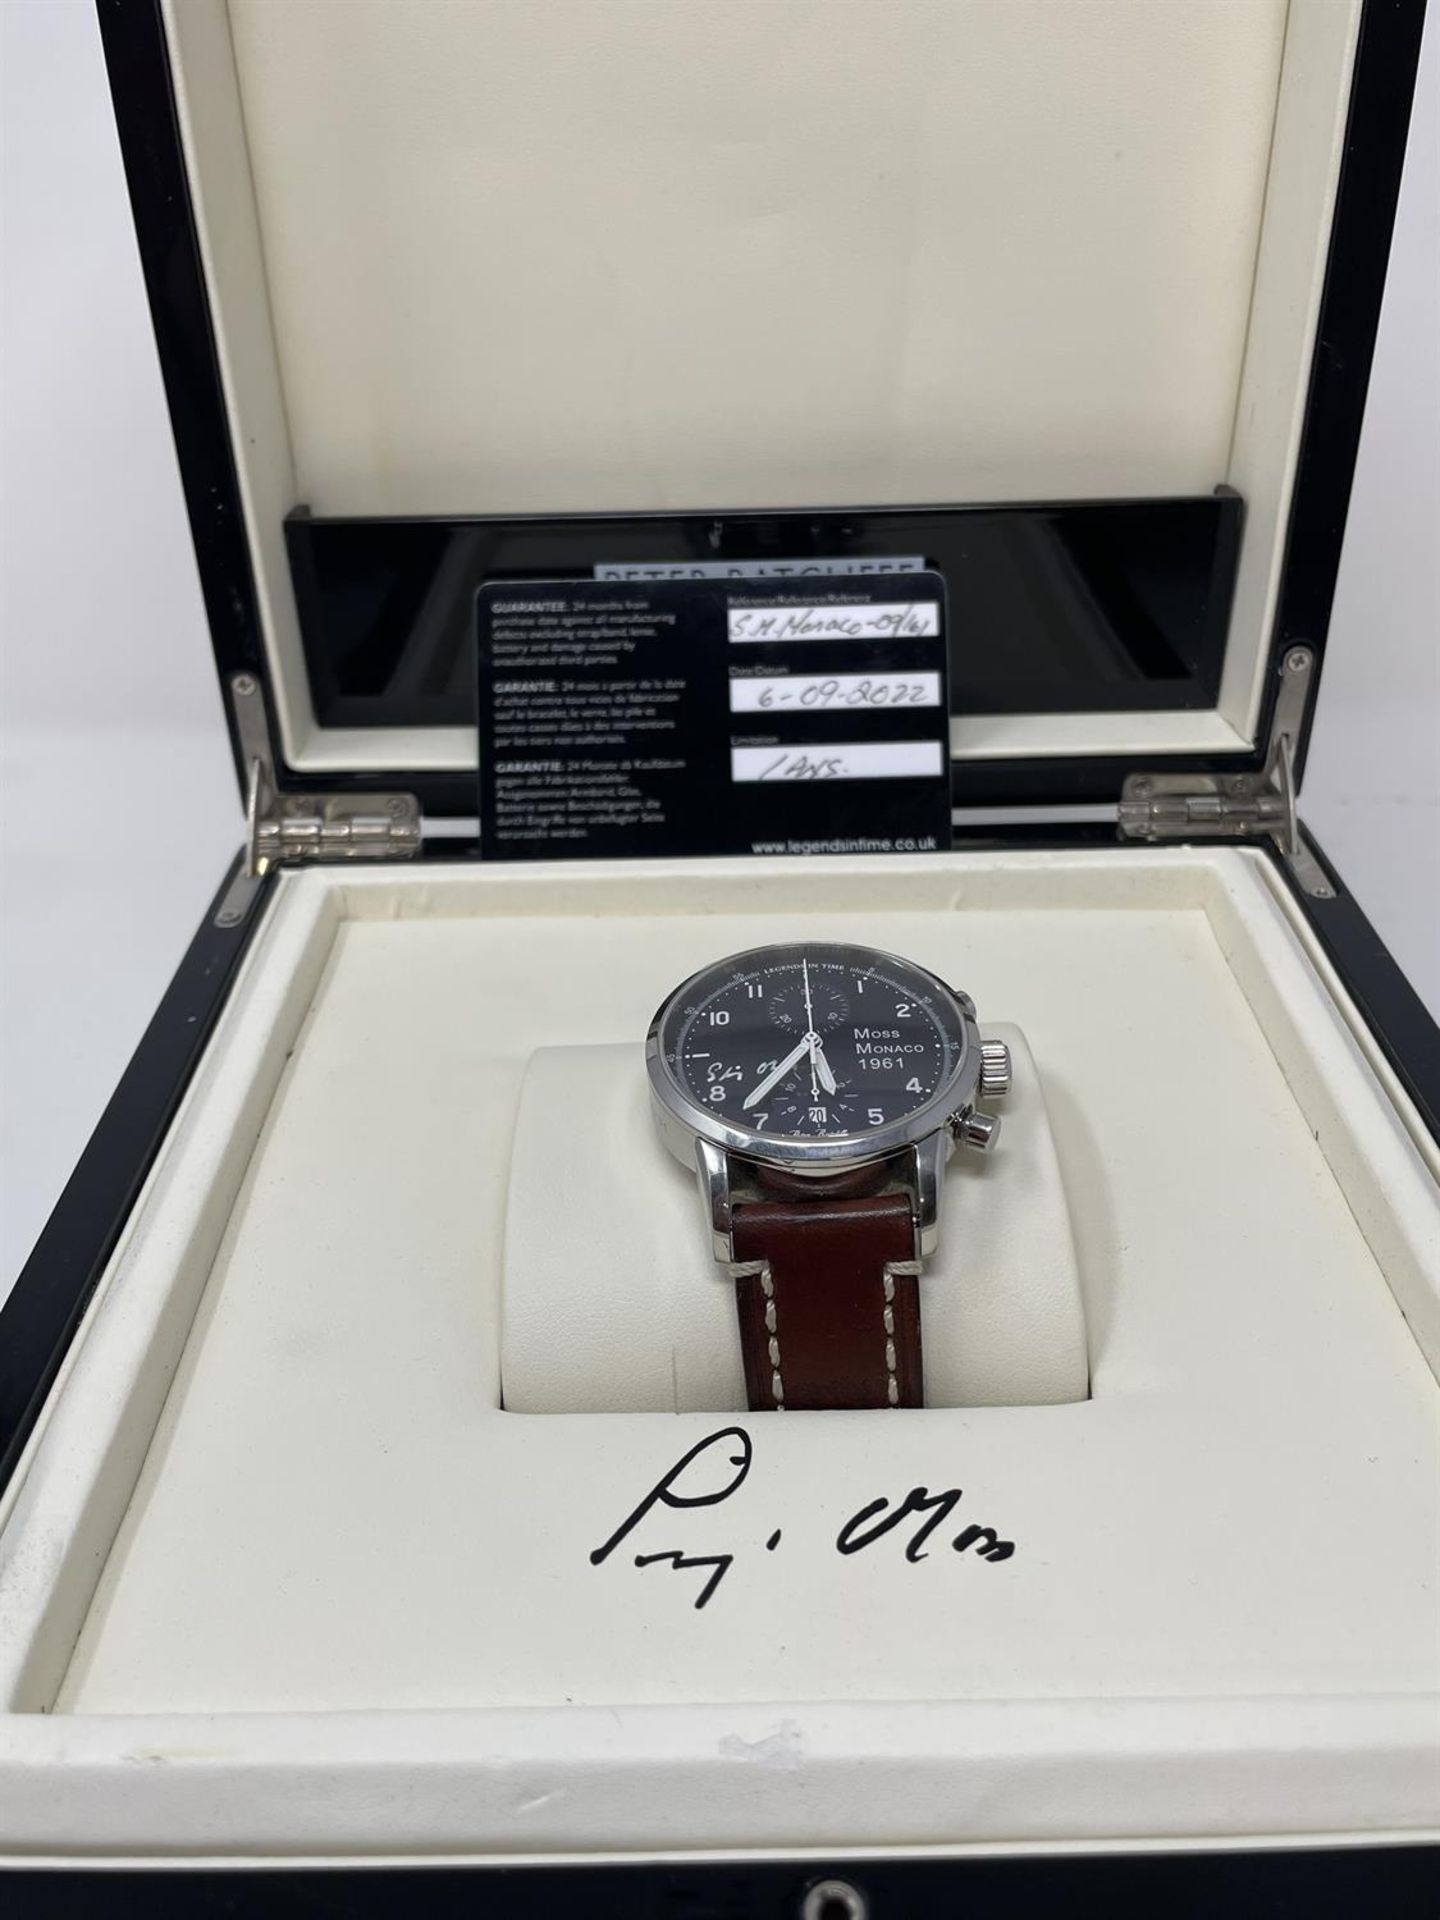 Limited Edition Signed Stirling Moss 50th Anniversary Watch - Image 10 of 10